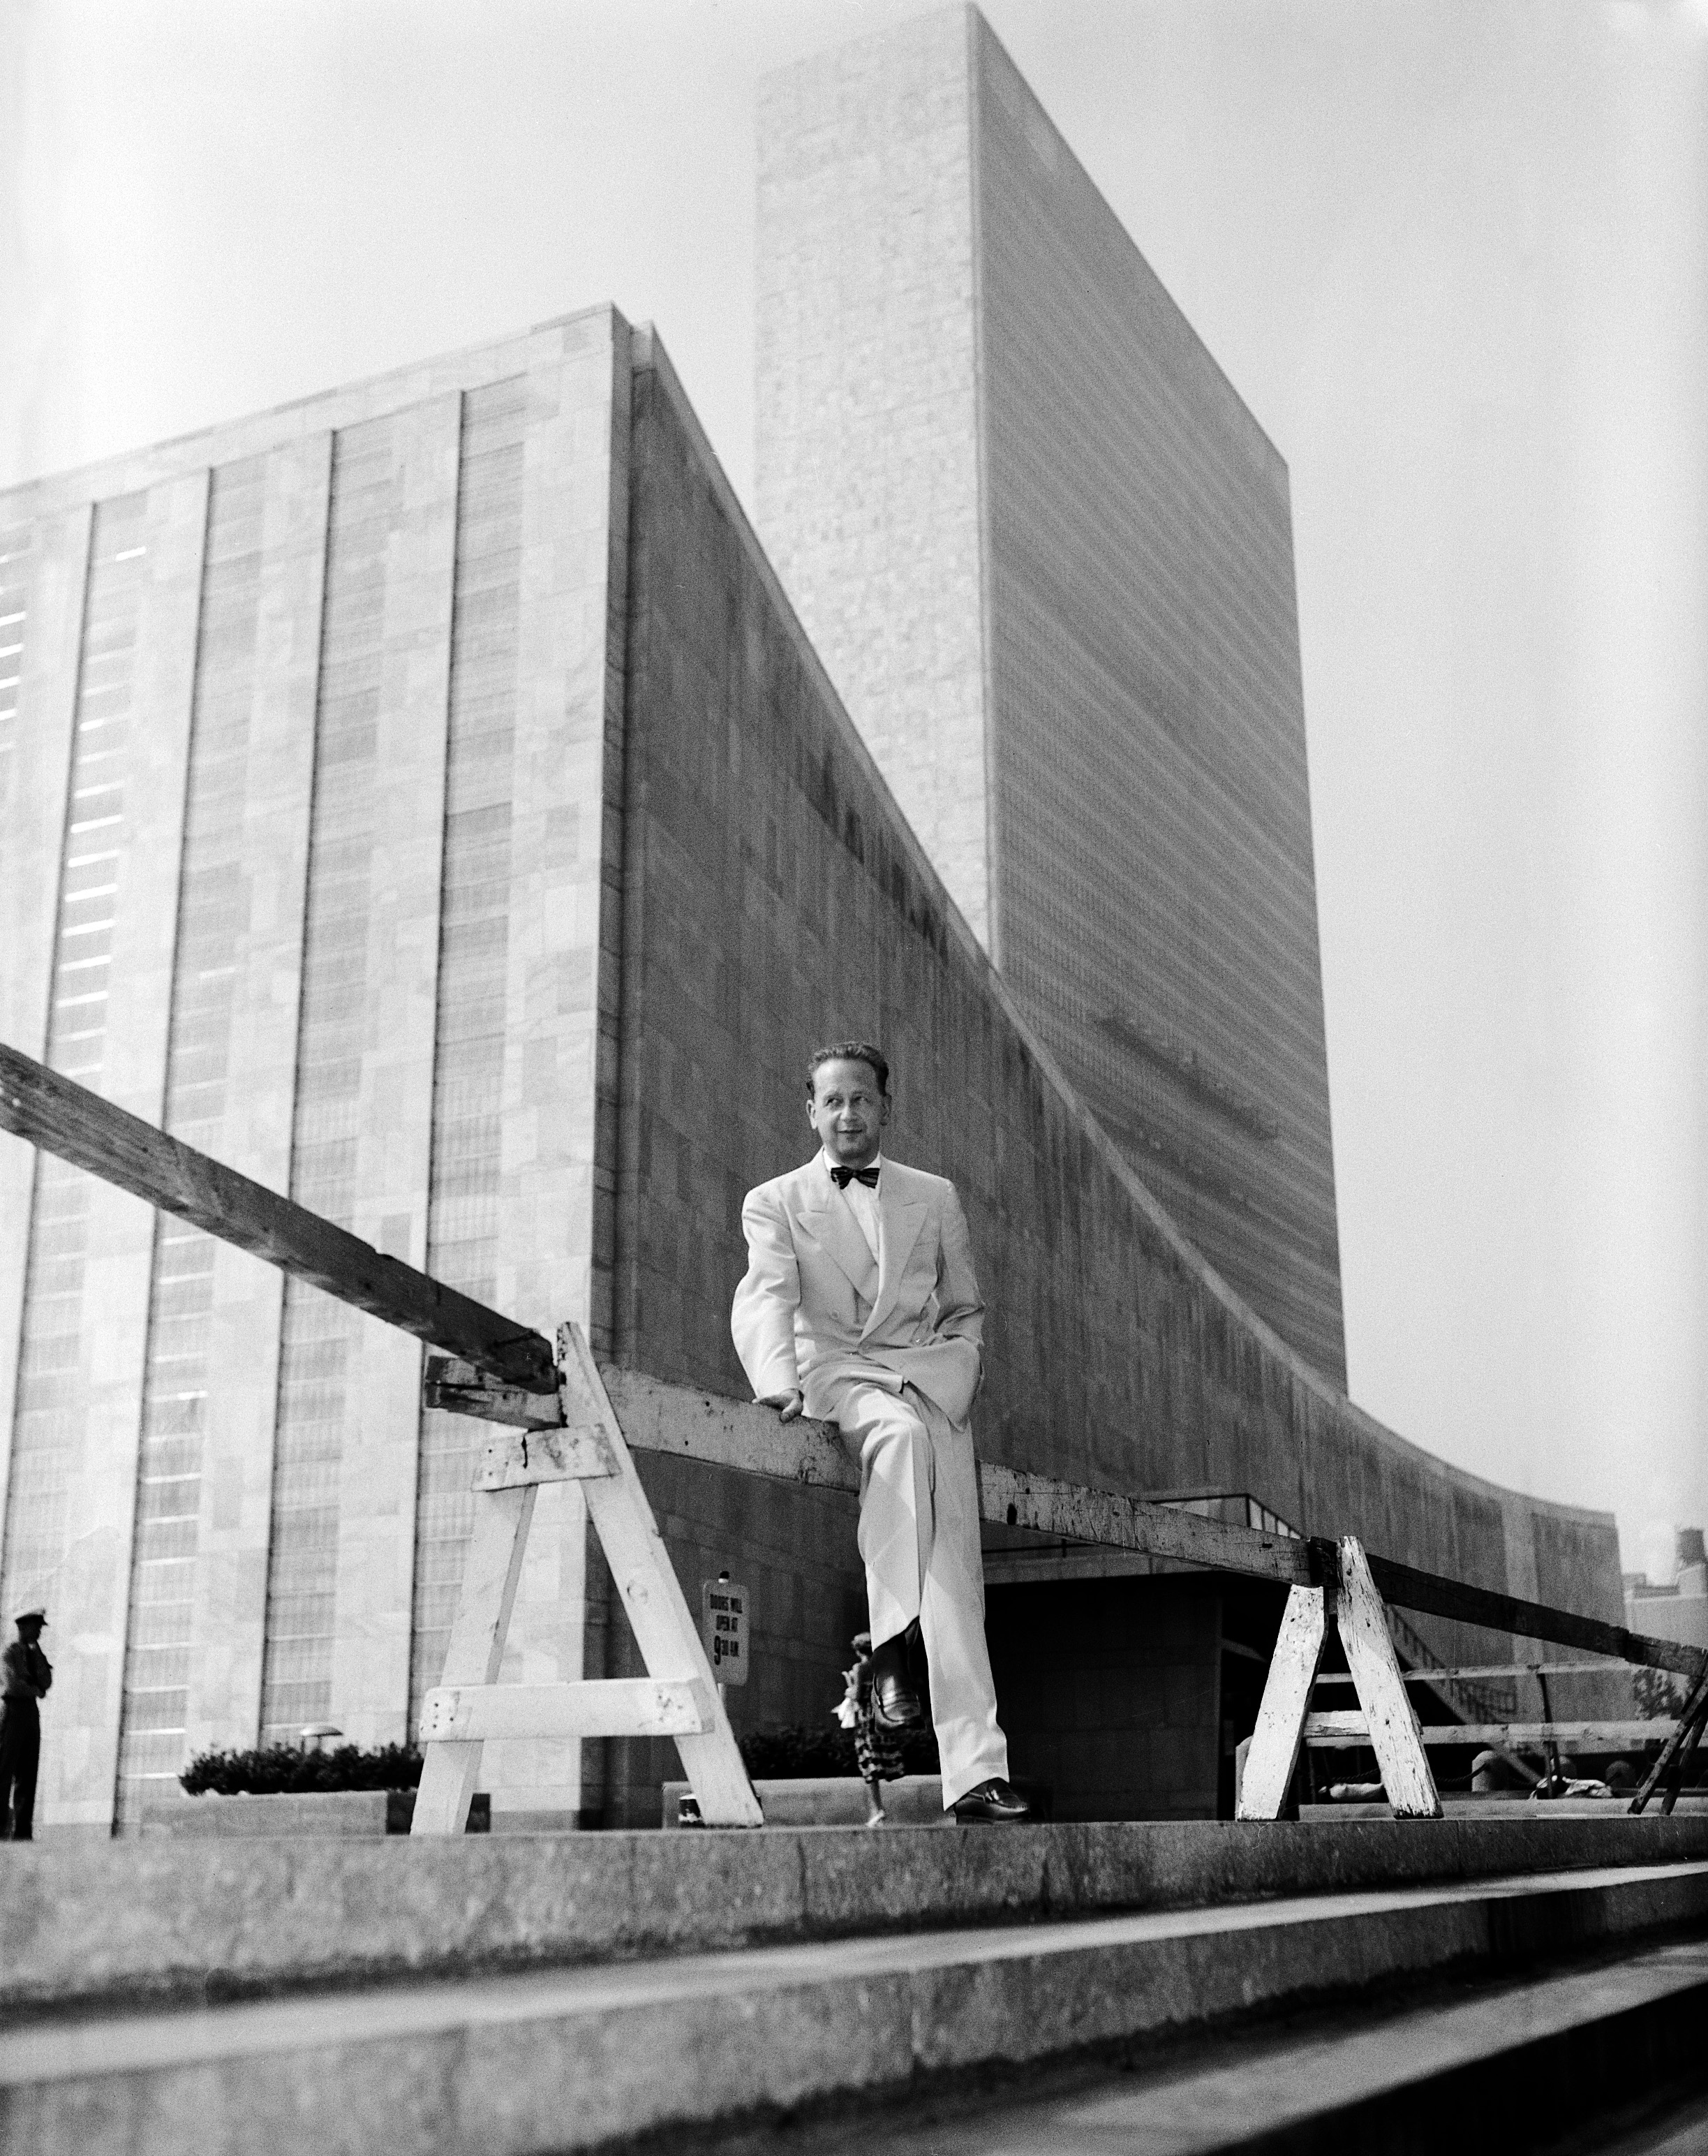 A man posing and sitting in  front of a large building with glass windows (UN headquarters)